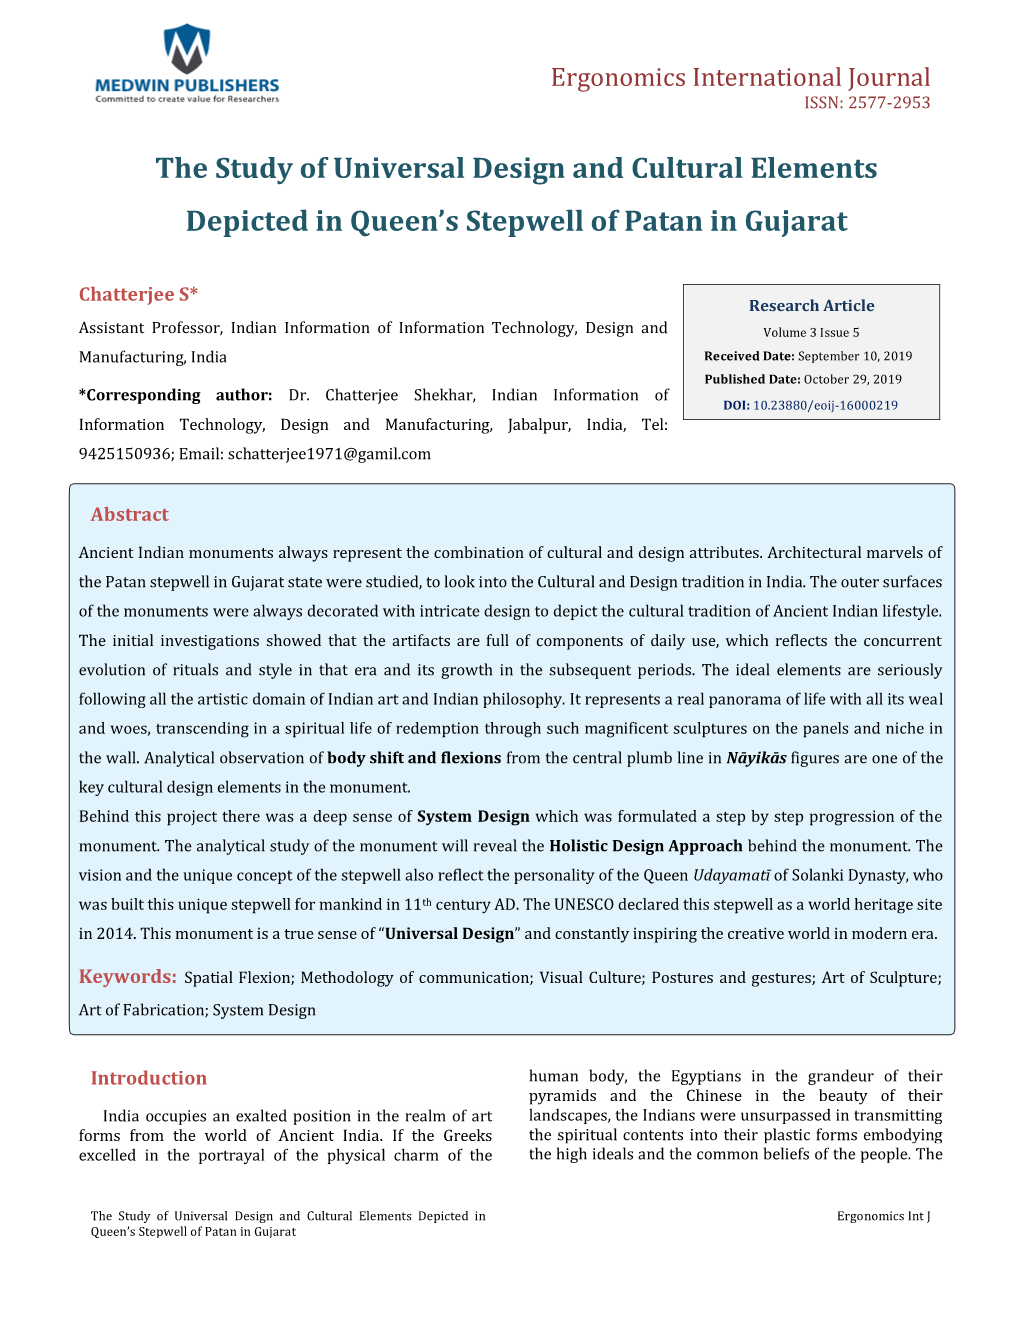 The Study of Universal Design and Cultural Elements Depicted in Queen’S Stepwell of Patan in Gujarat